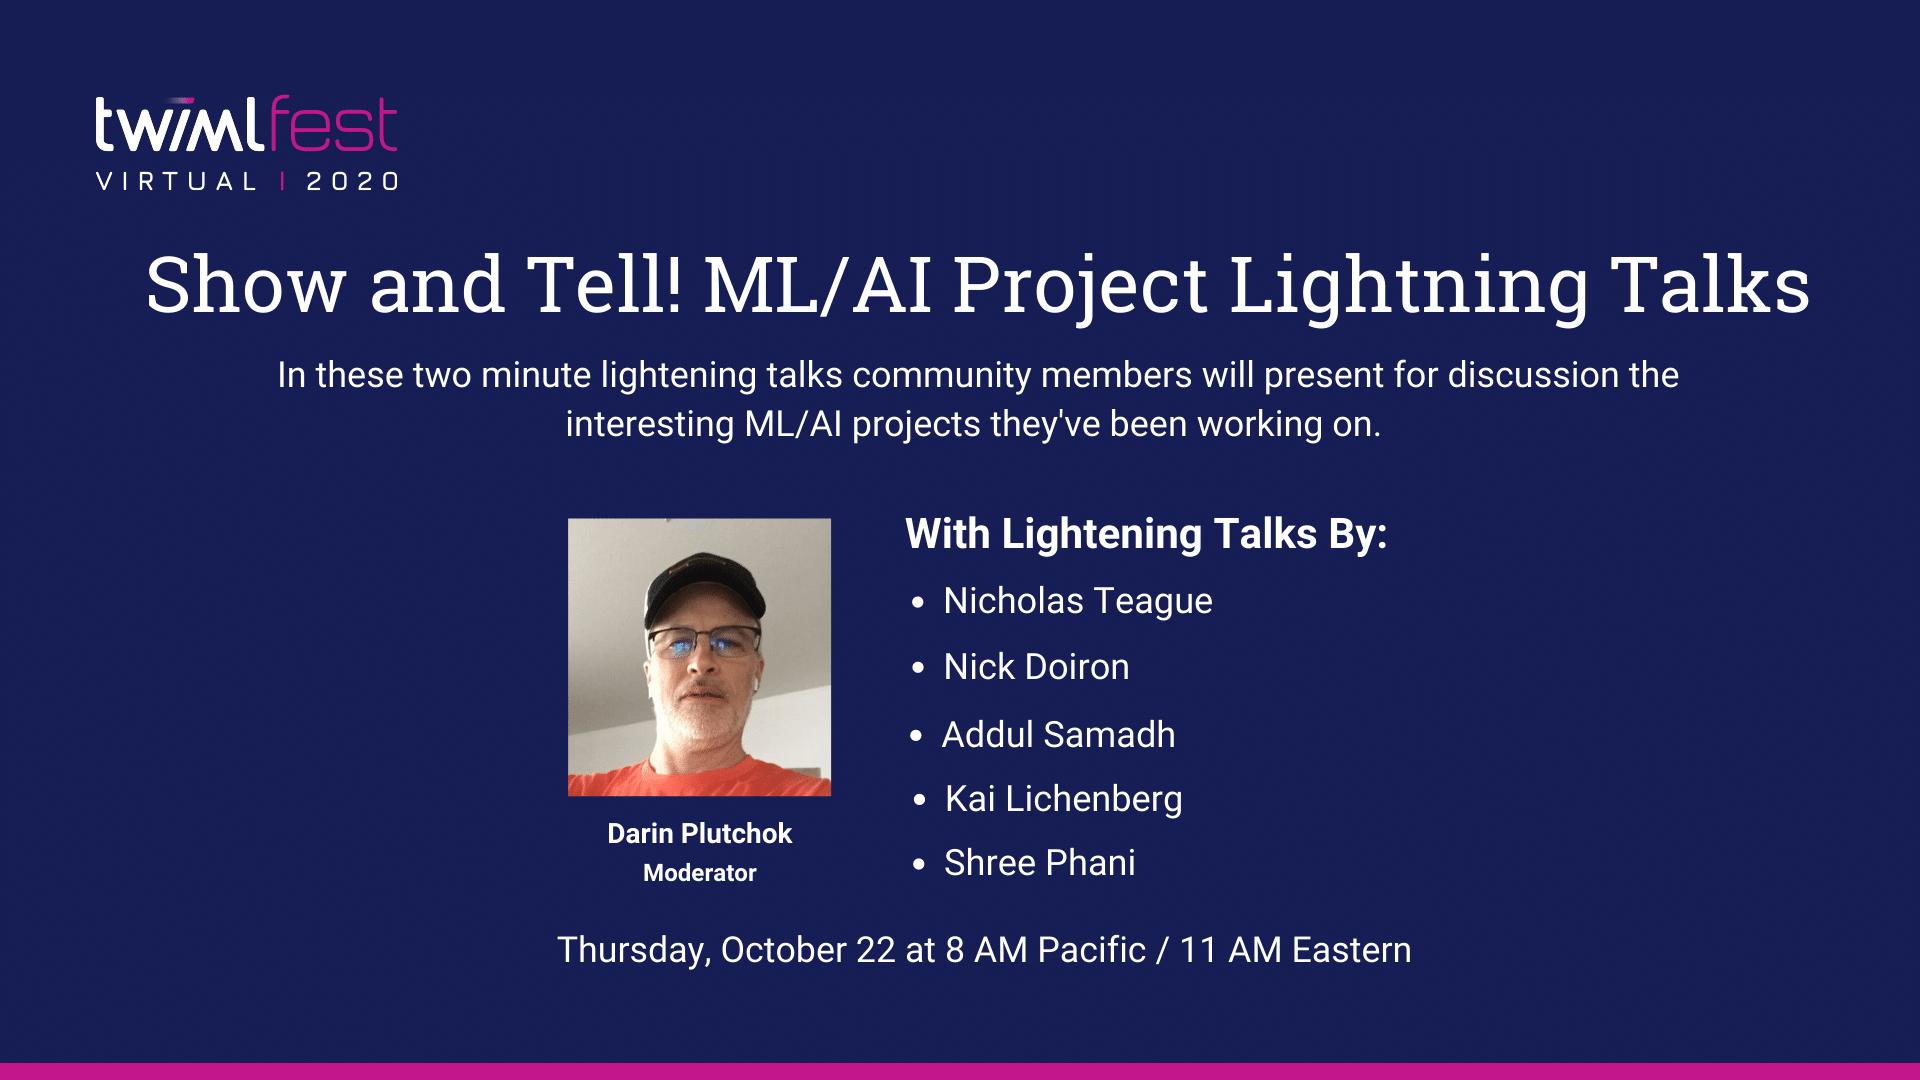 Cover Image: Show and Tell! ML/AI Project Lightning Talks